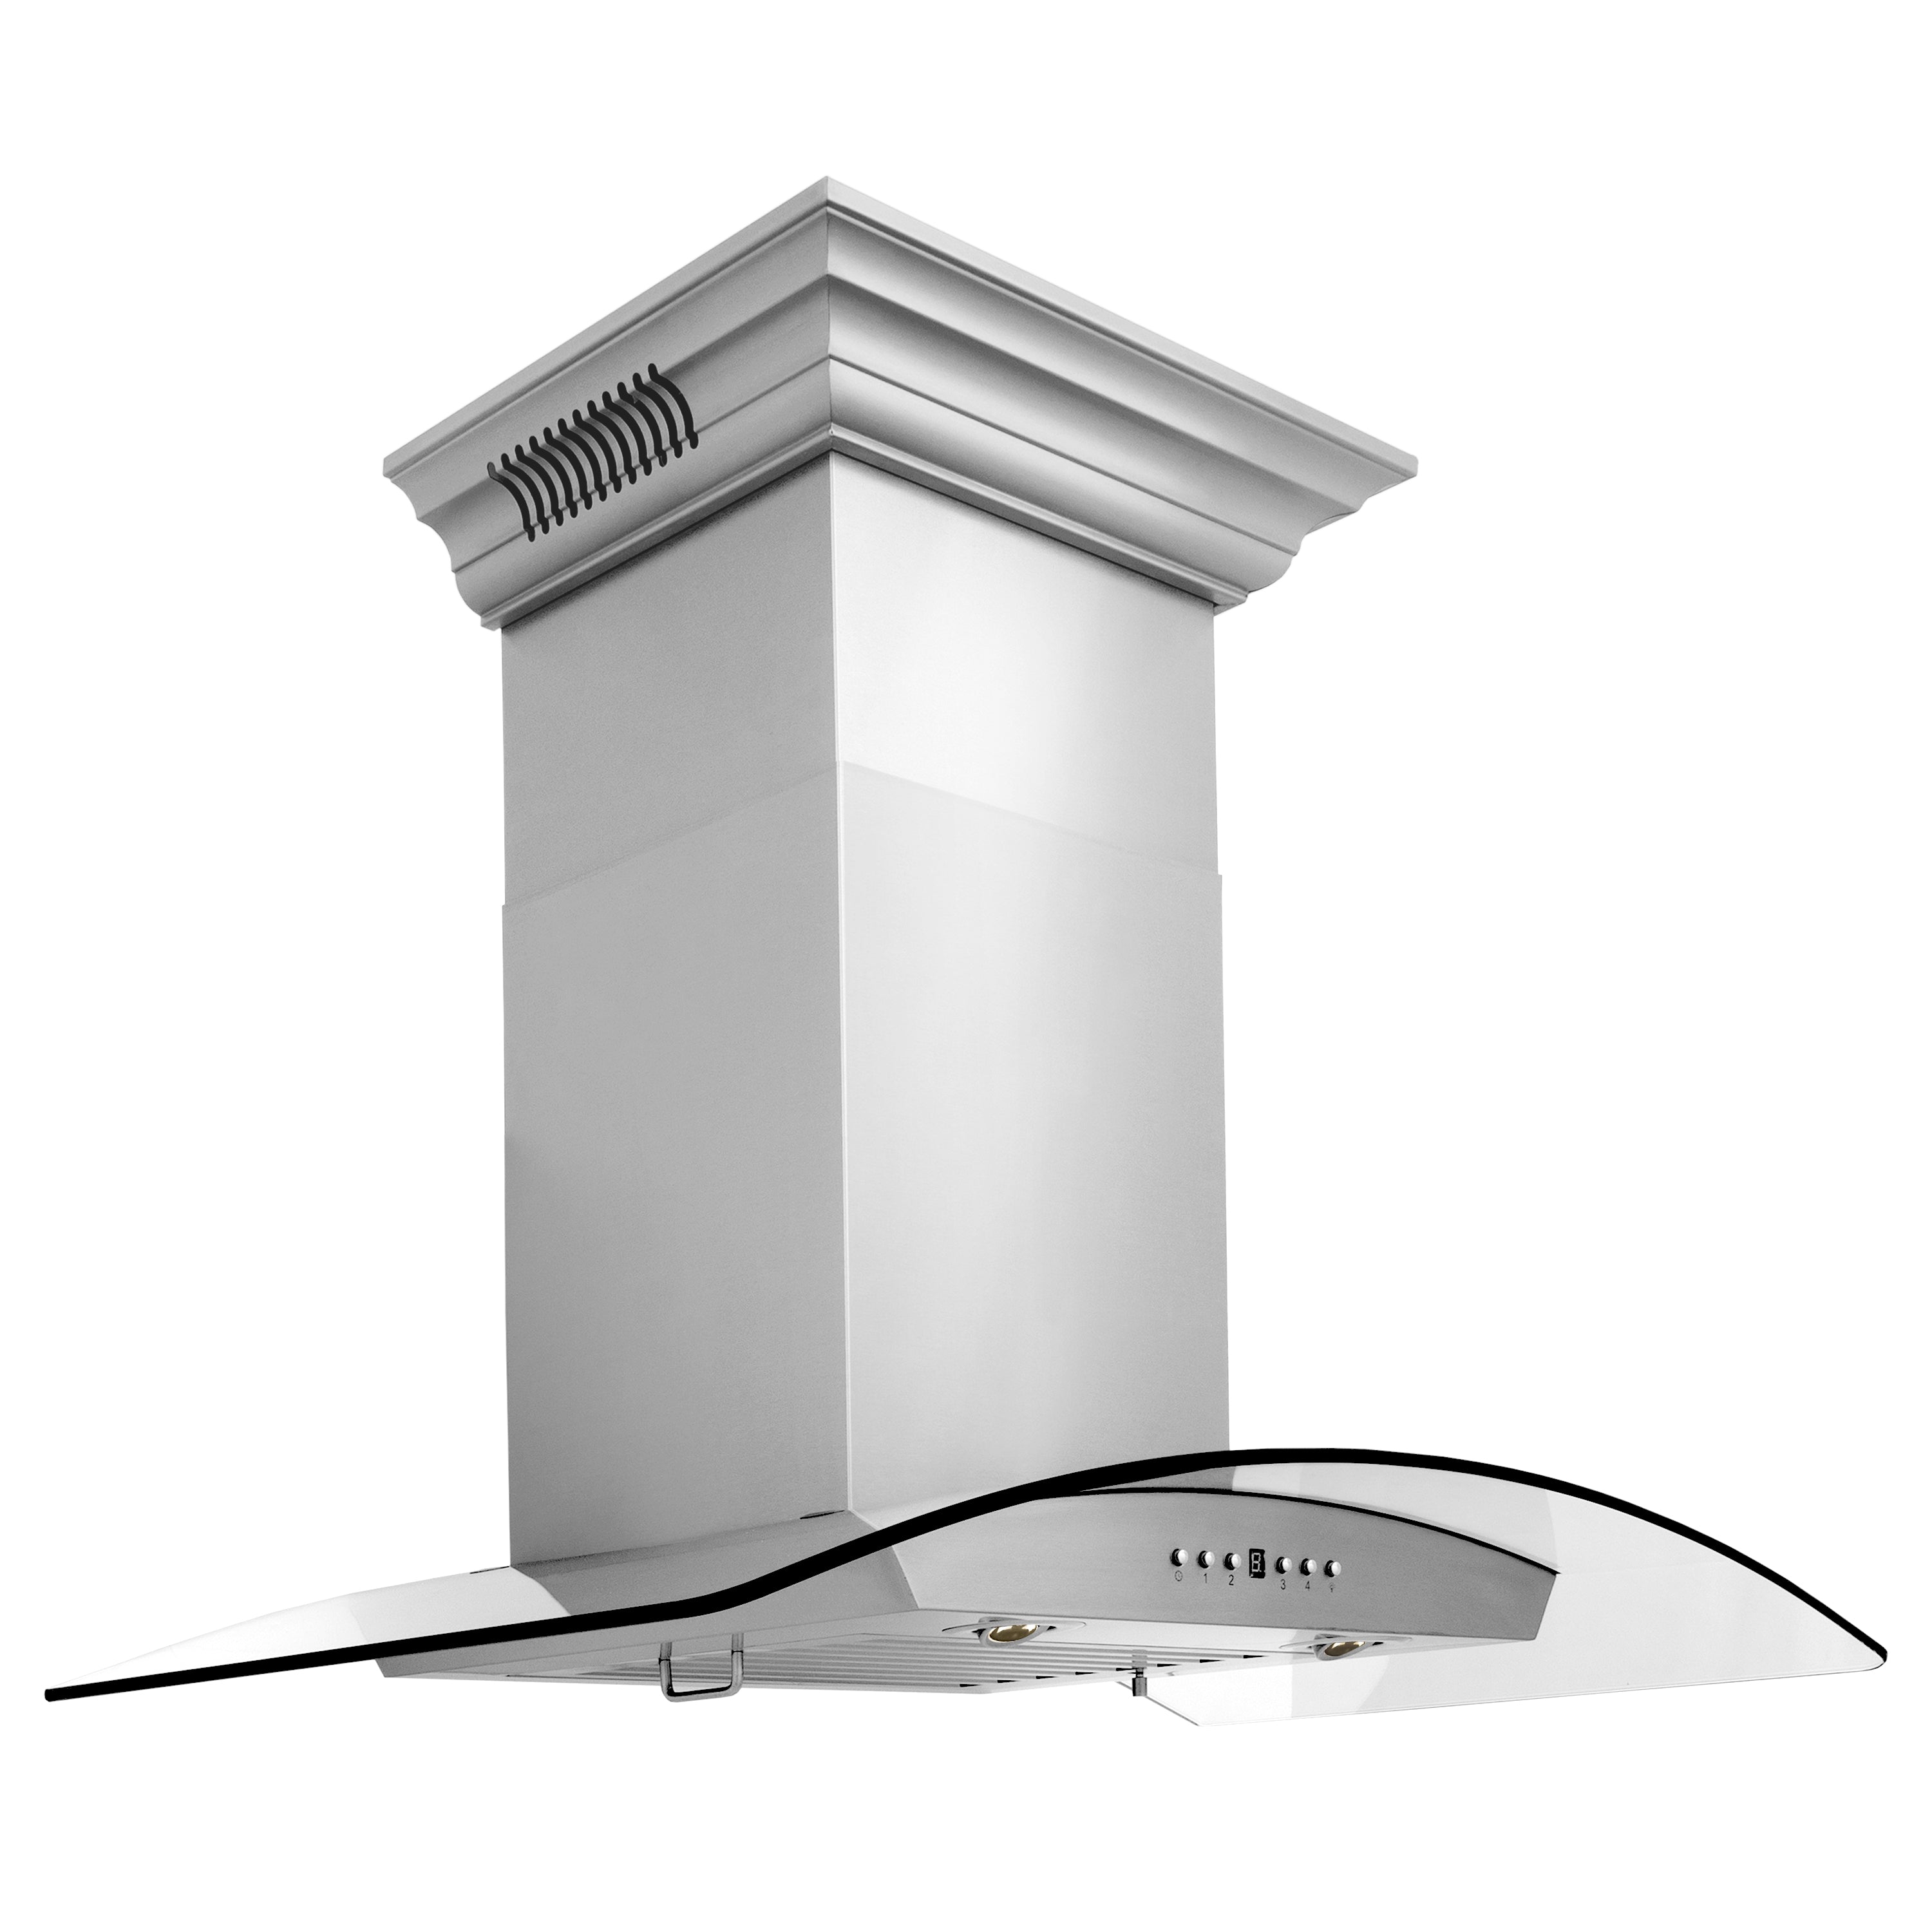 36" ZLINE CrownSound‚ Ducted Vent Wall Mount Range Hood in Stainless Steel with Built-in Bluetooth Speakers (KZCRN-BT-36)